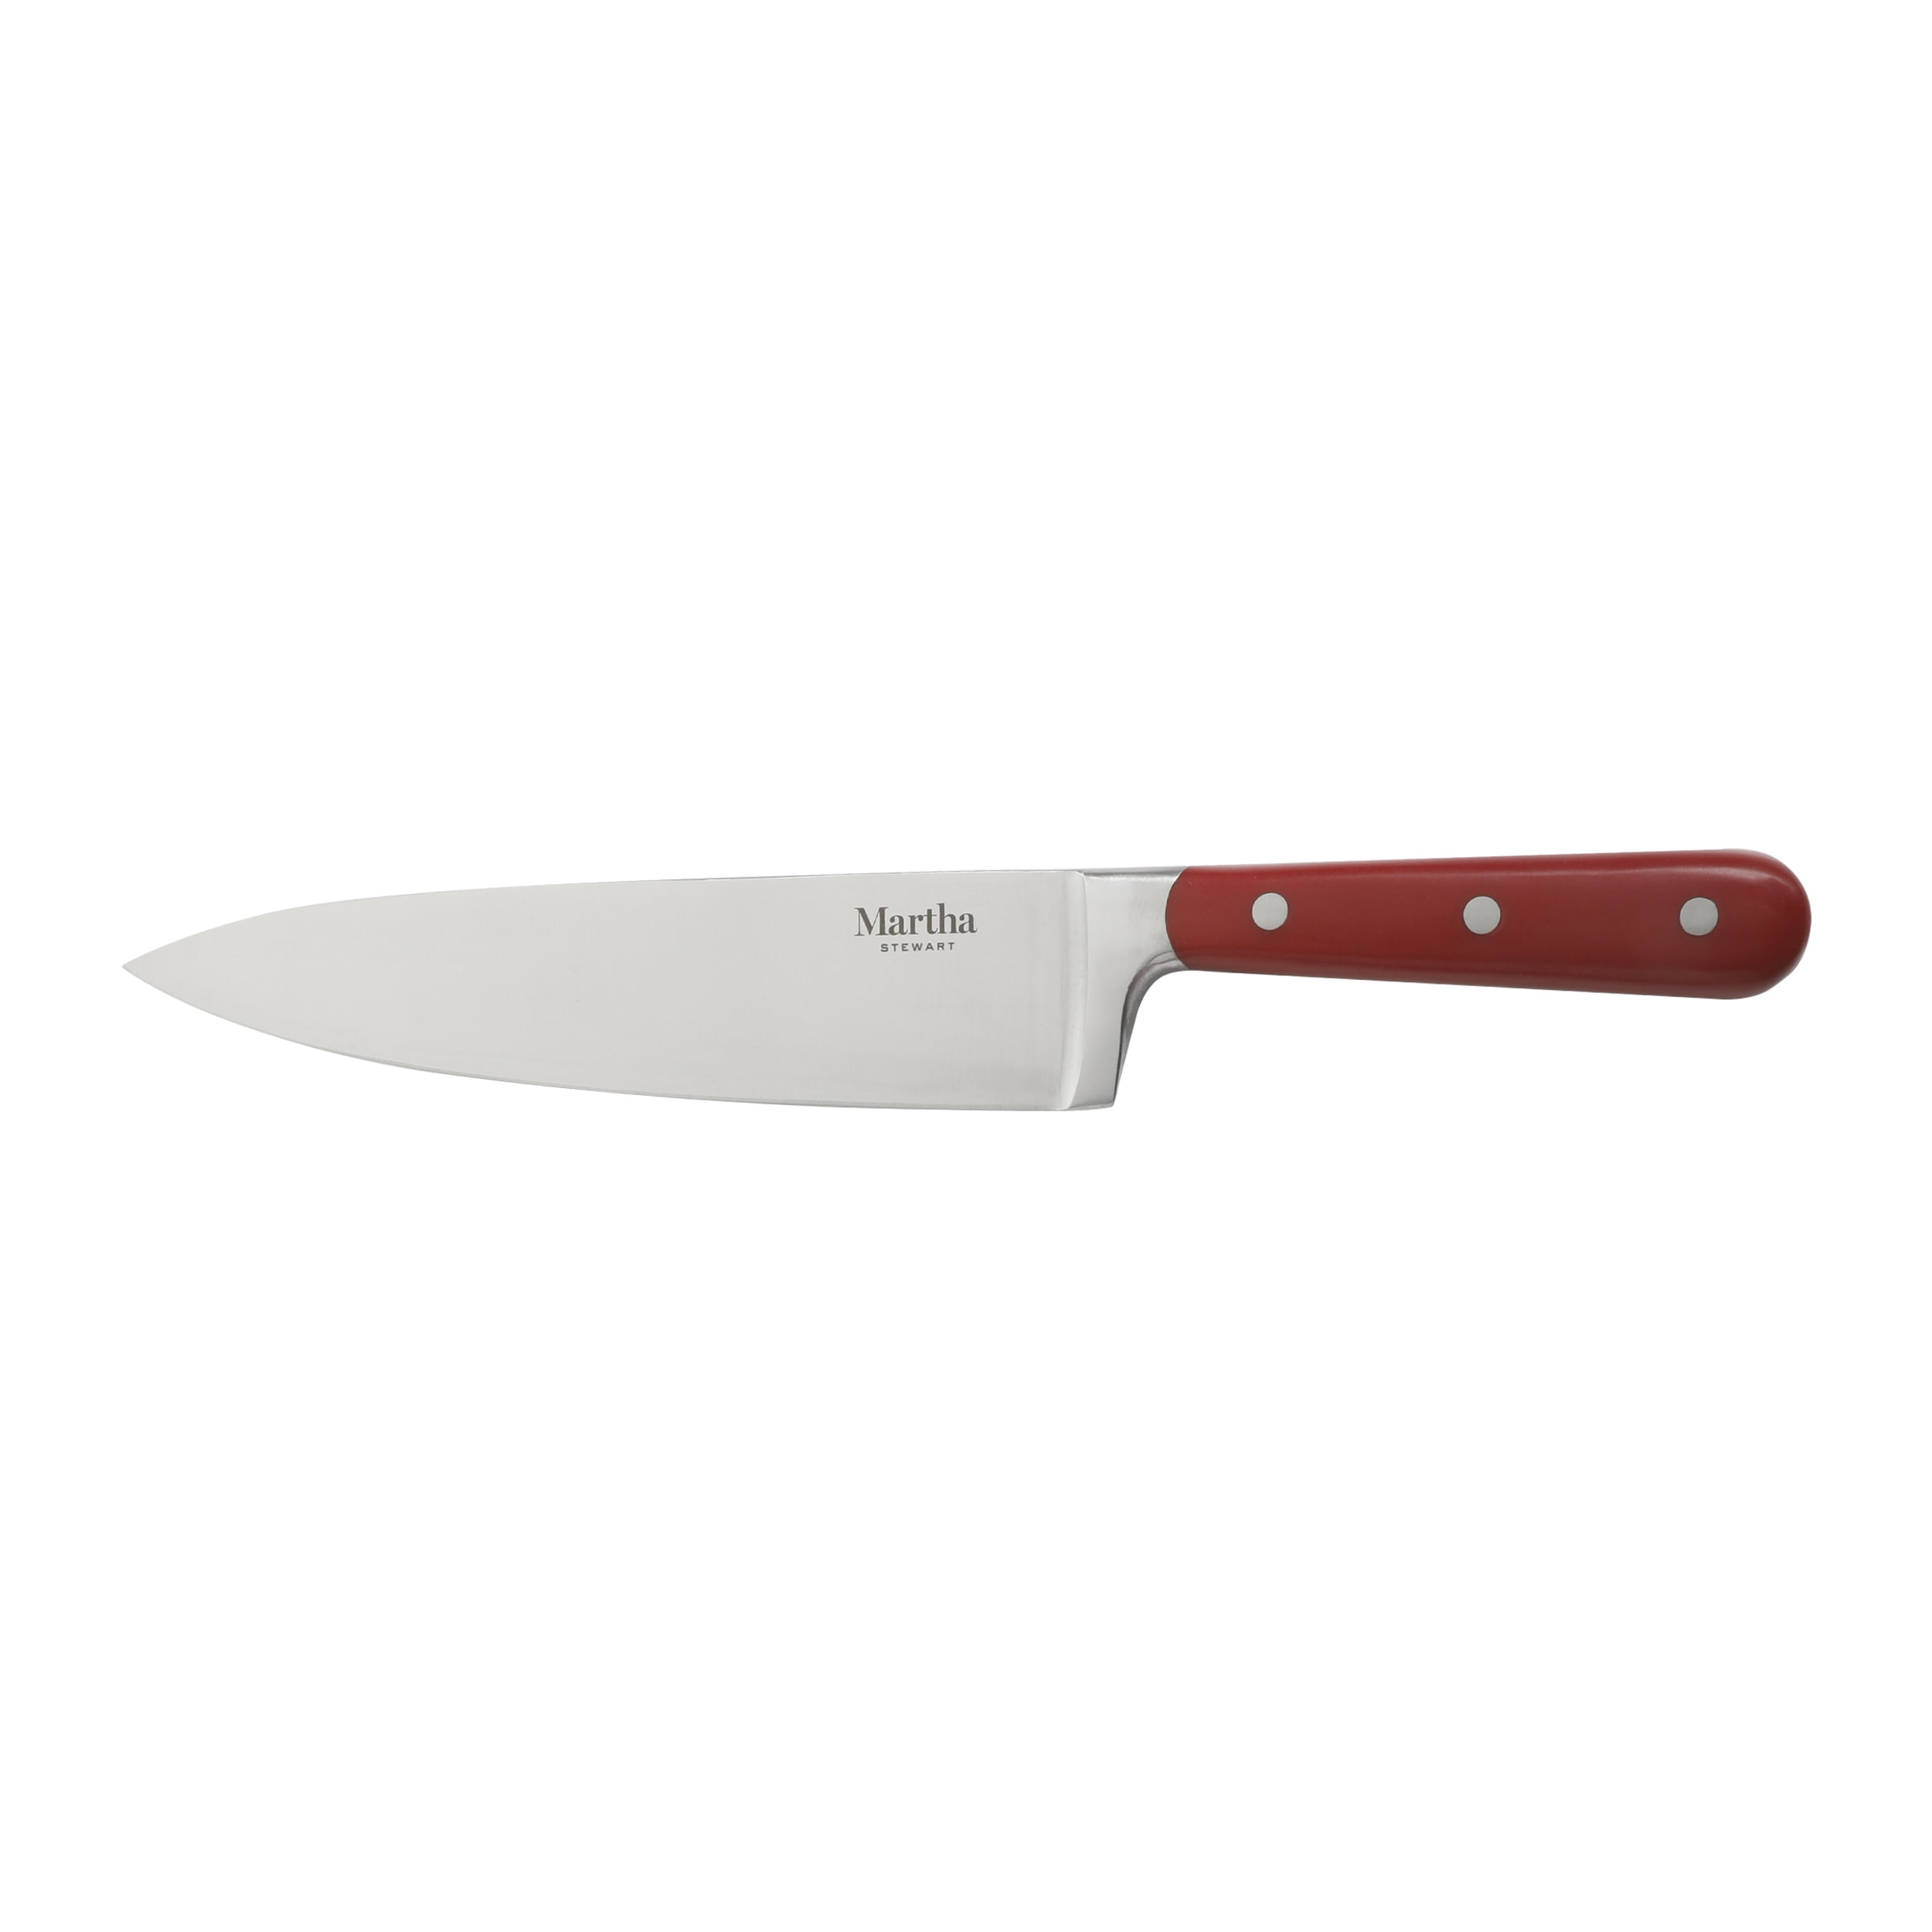 Secunorm Smartcut MDP Knife - Malloy Supply